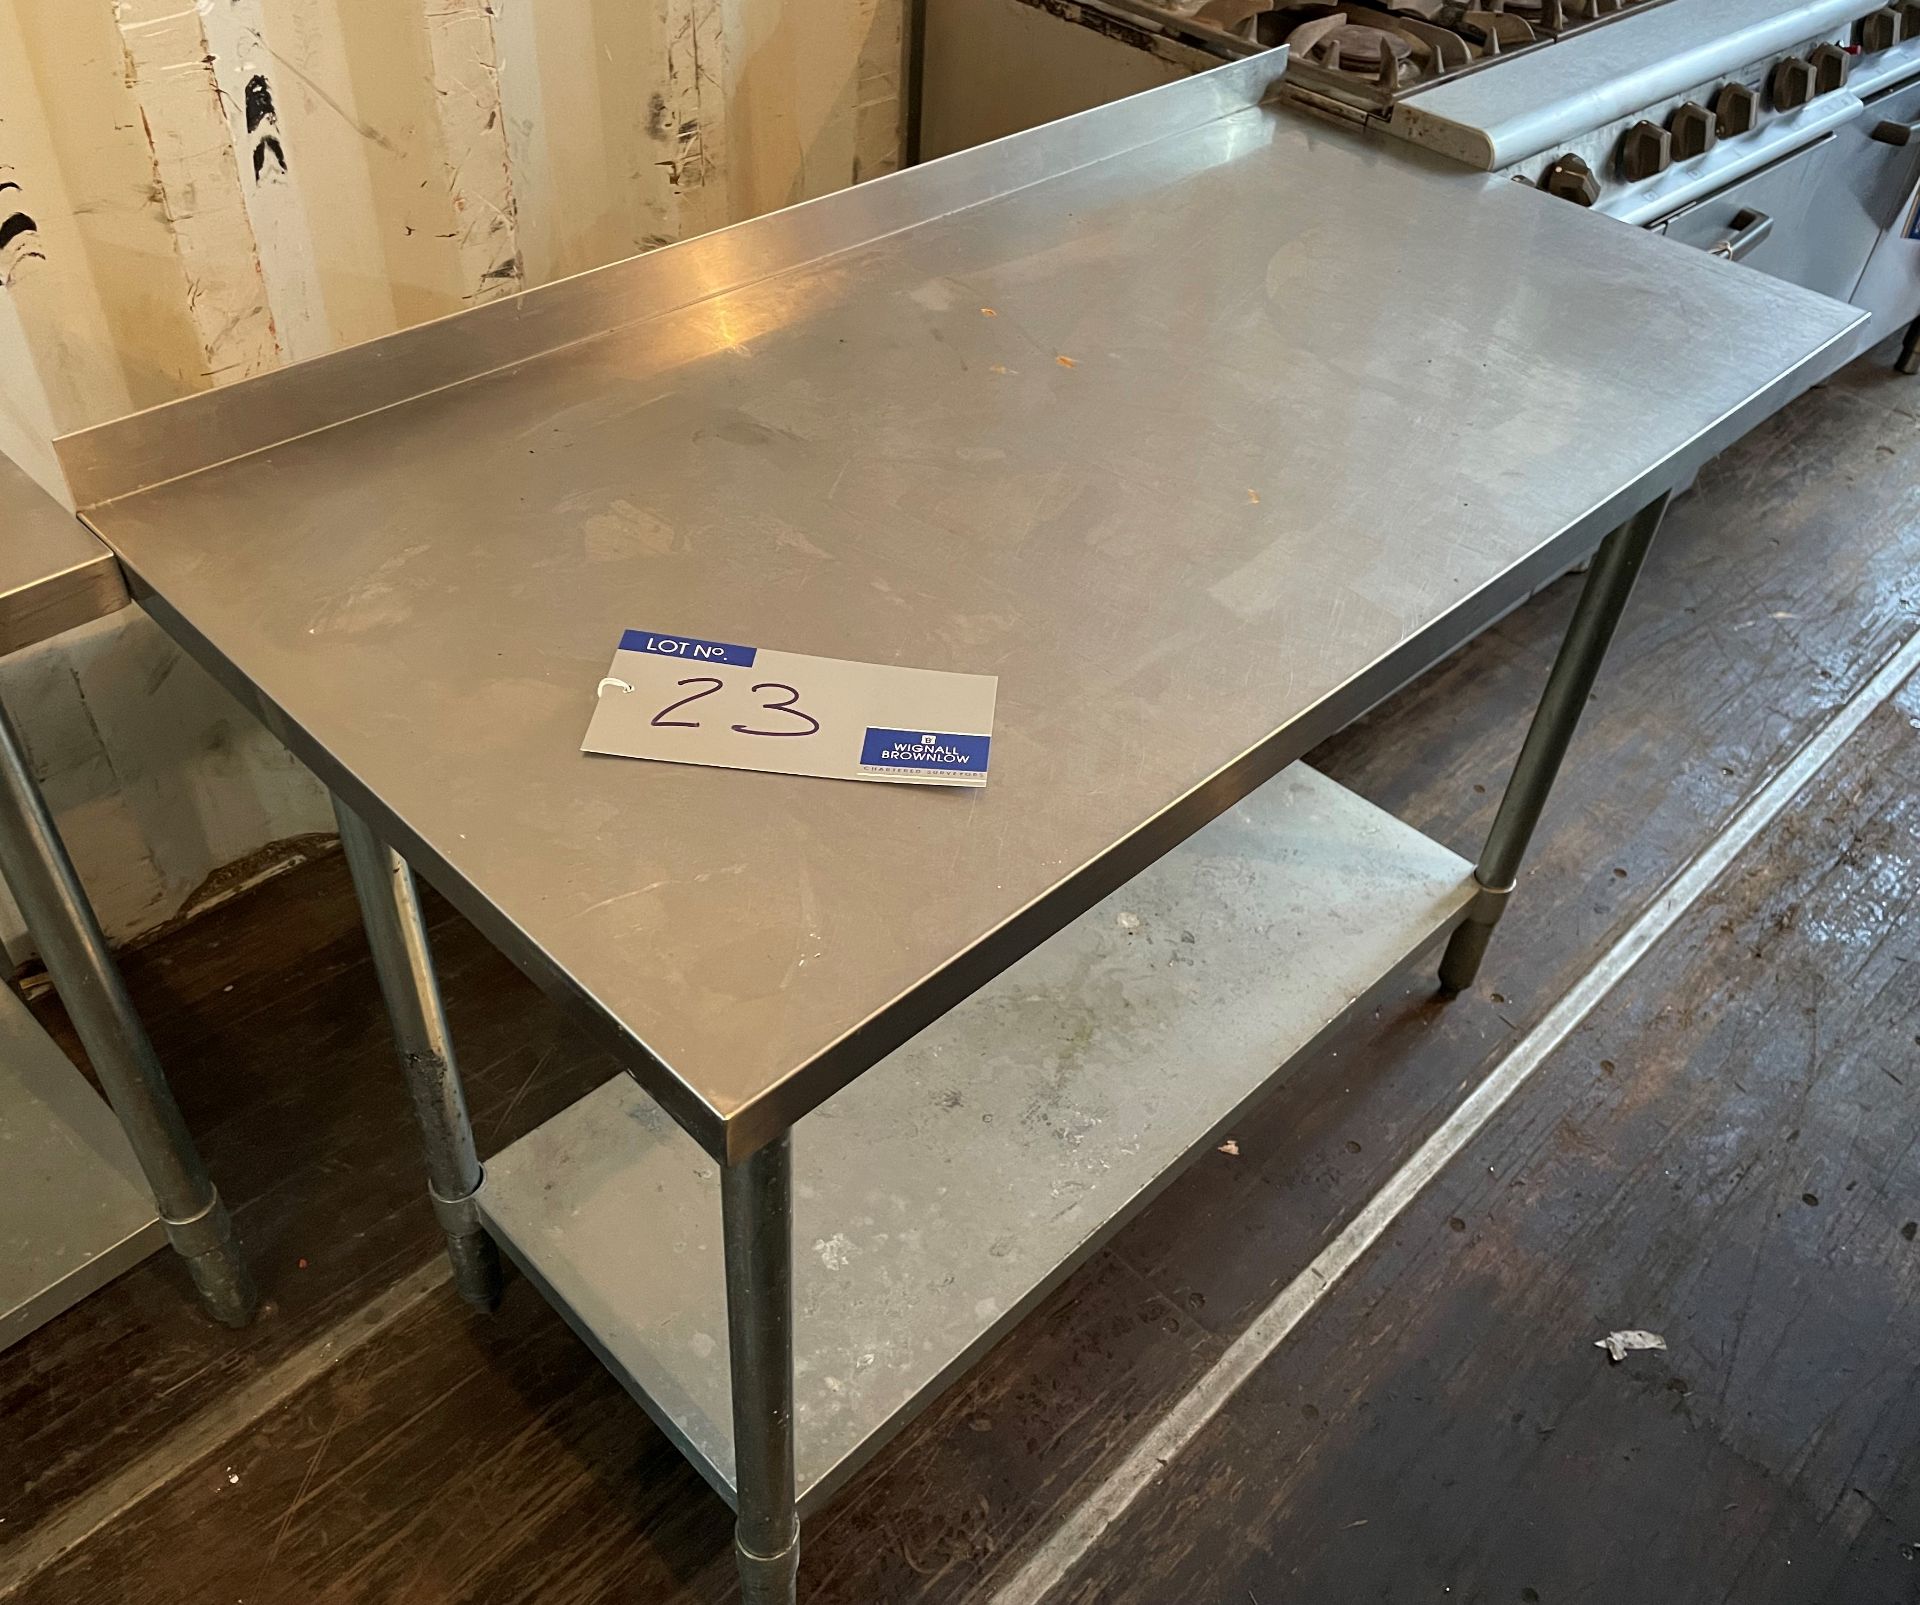 A Stainless Steel Food Preparation Bench, 200cm x 60cm x 85cm with undershelf (located at EMS